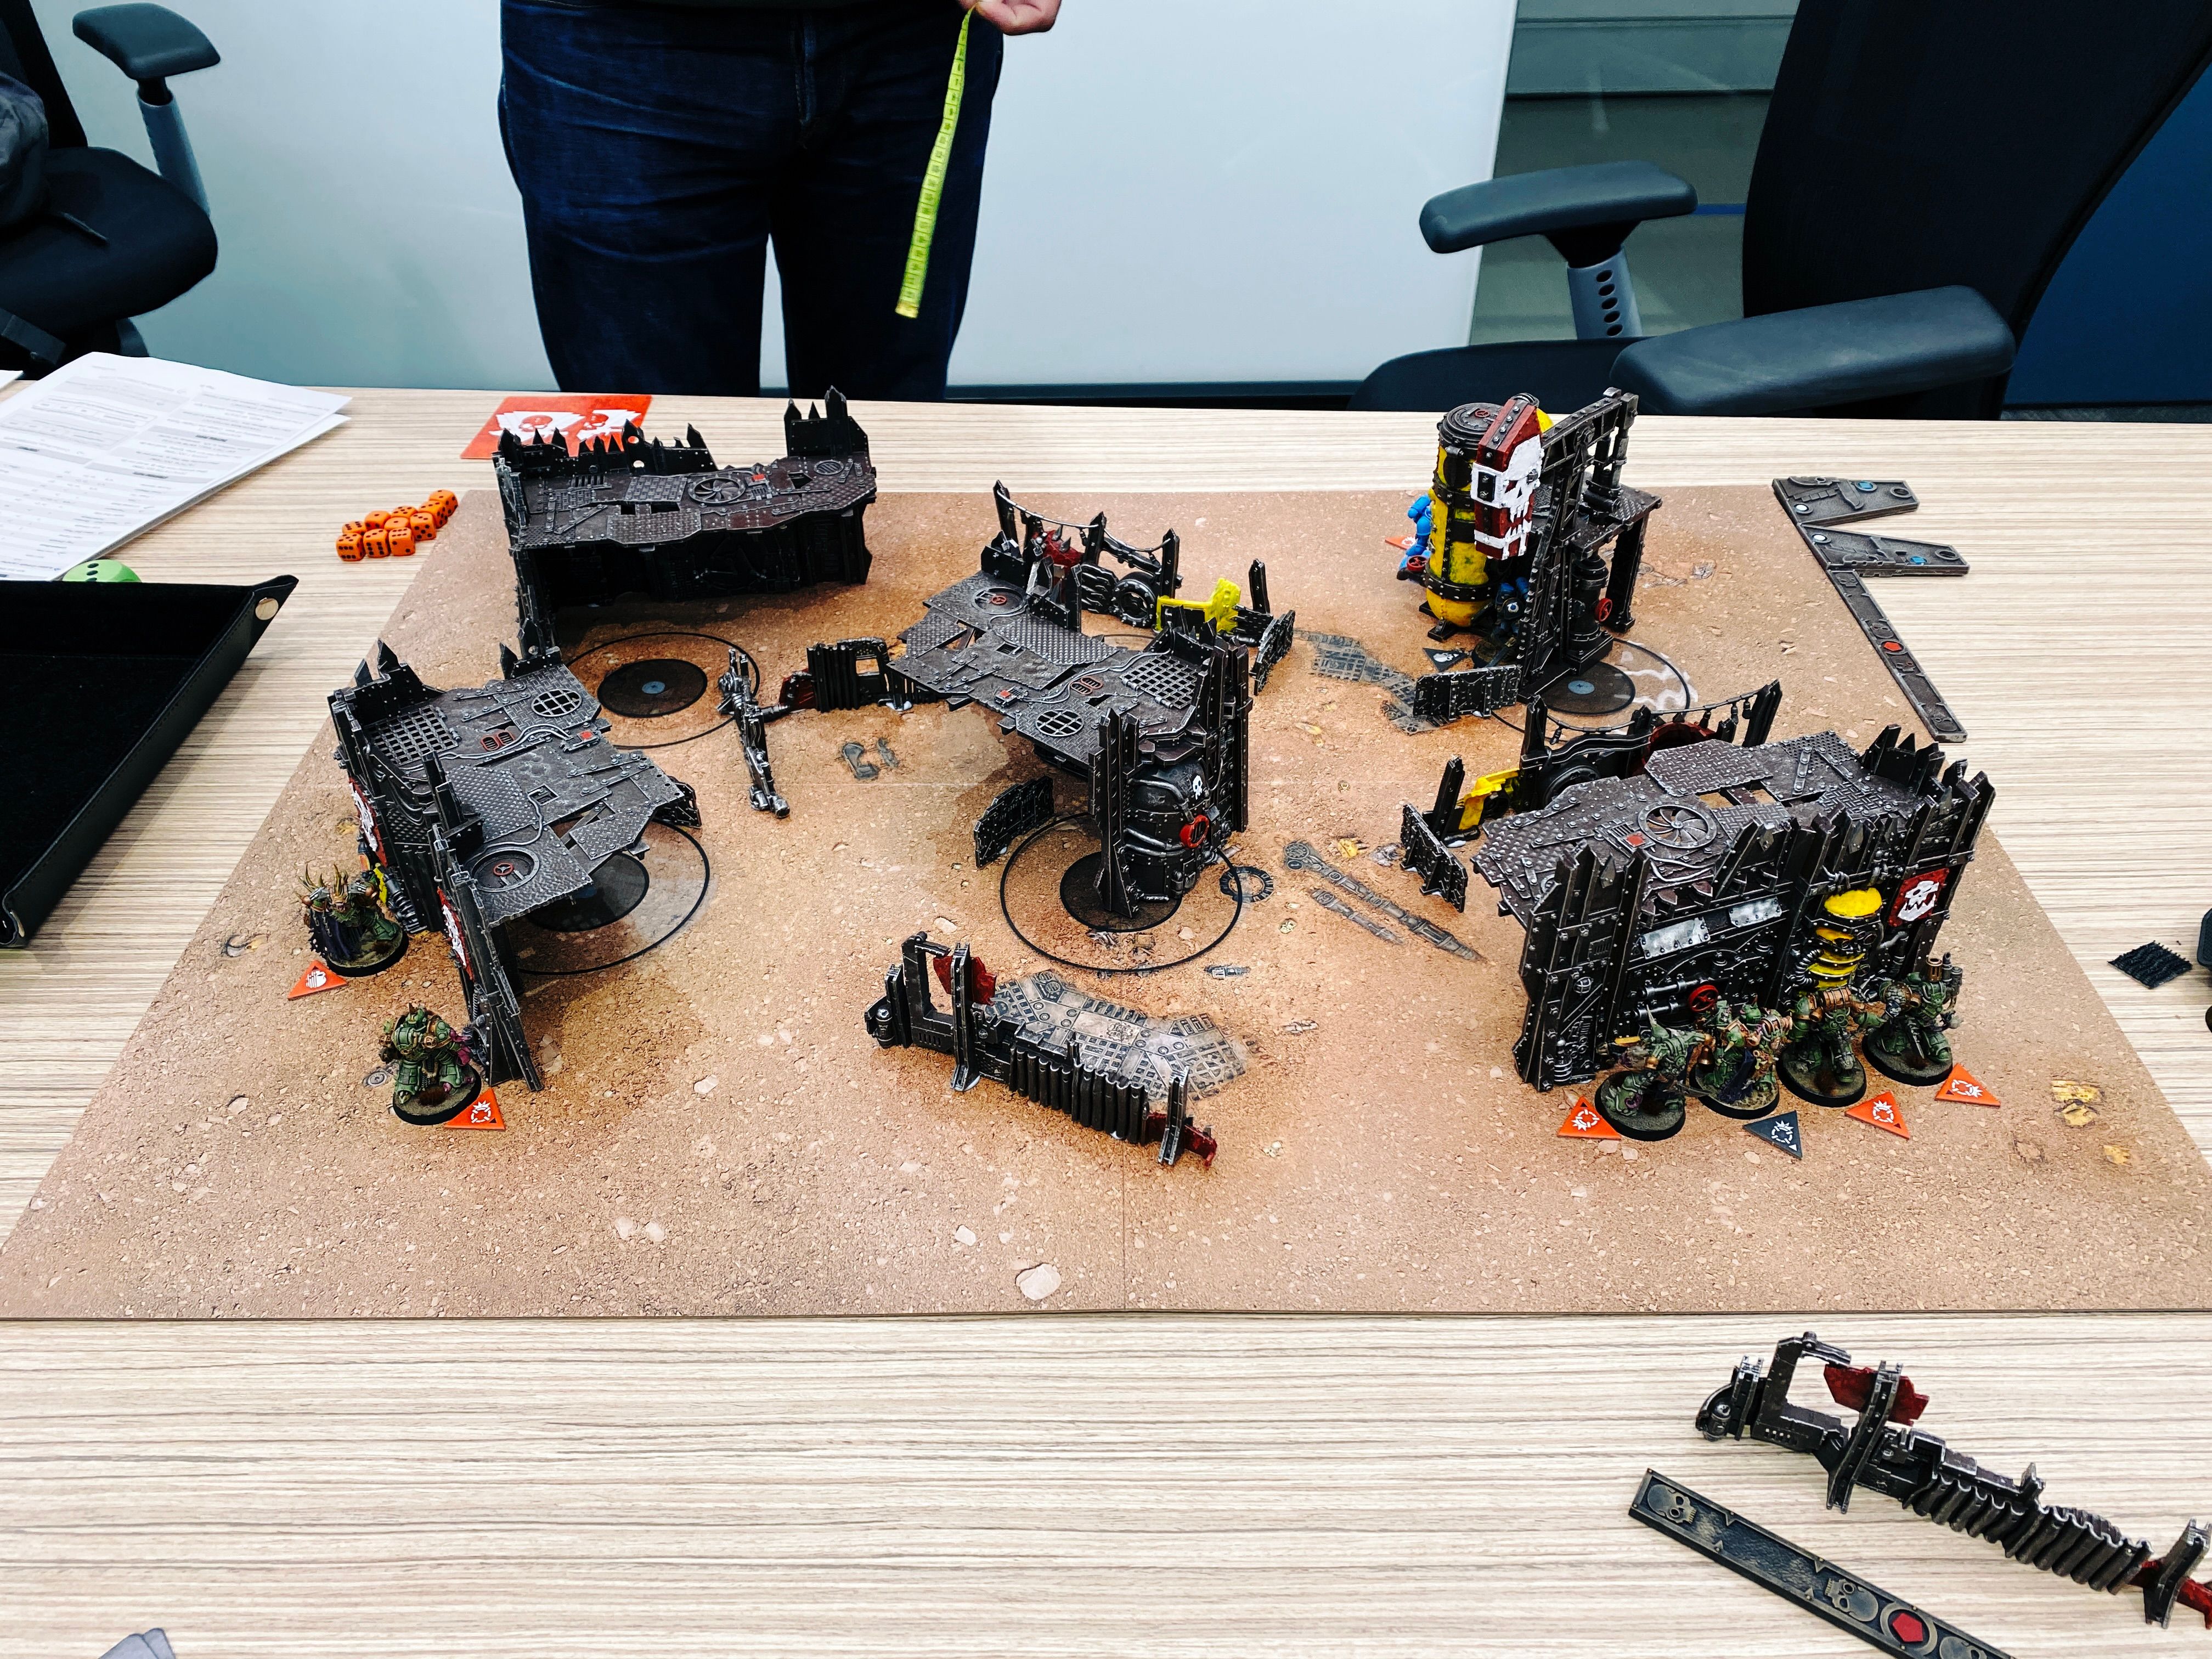 A photo of a game of Warhammer 40,000: Kill Team. It's on a gaming board with a bunch of junkyard-looking terrain, and on my side of the board are six green Death Guard Space Marines looking all gross and mutated.